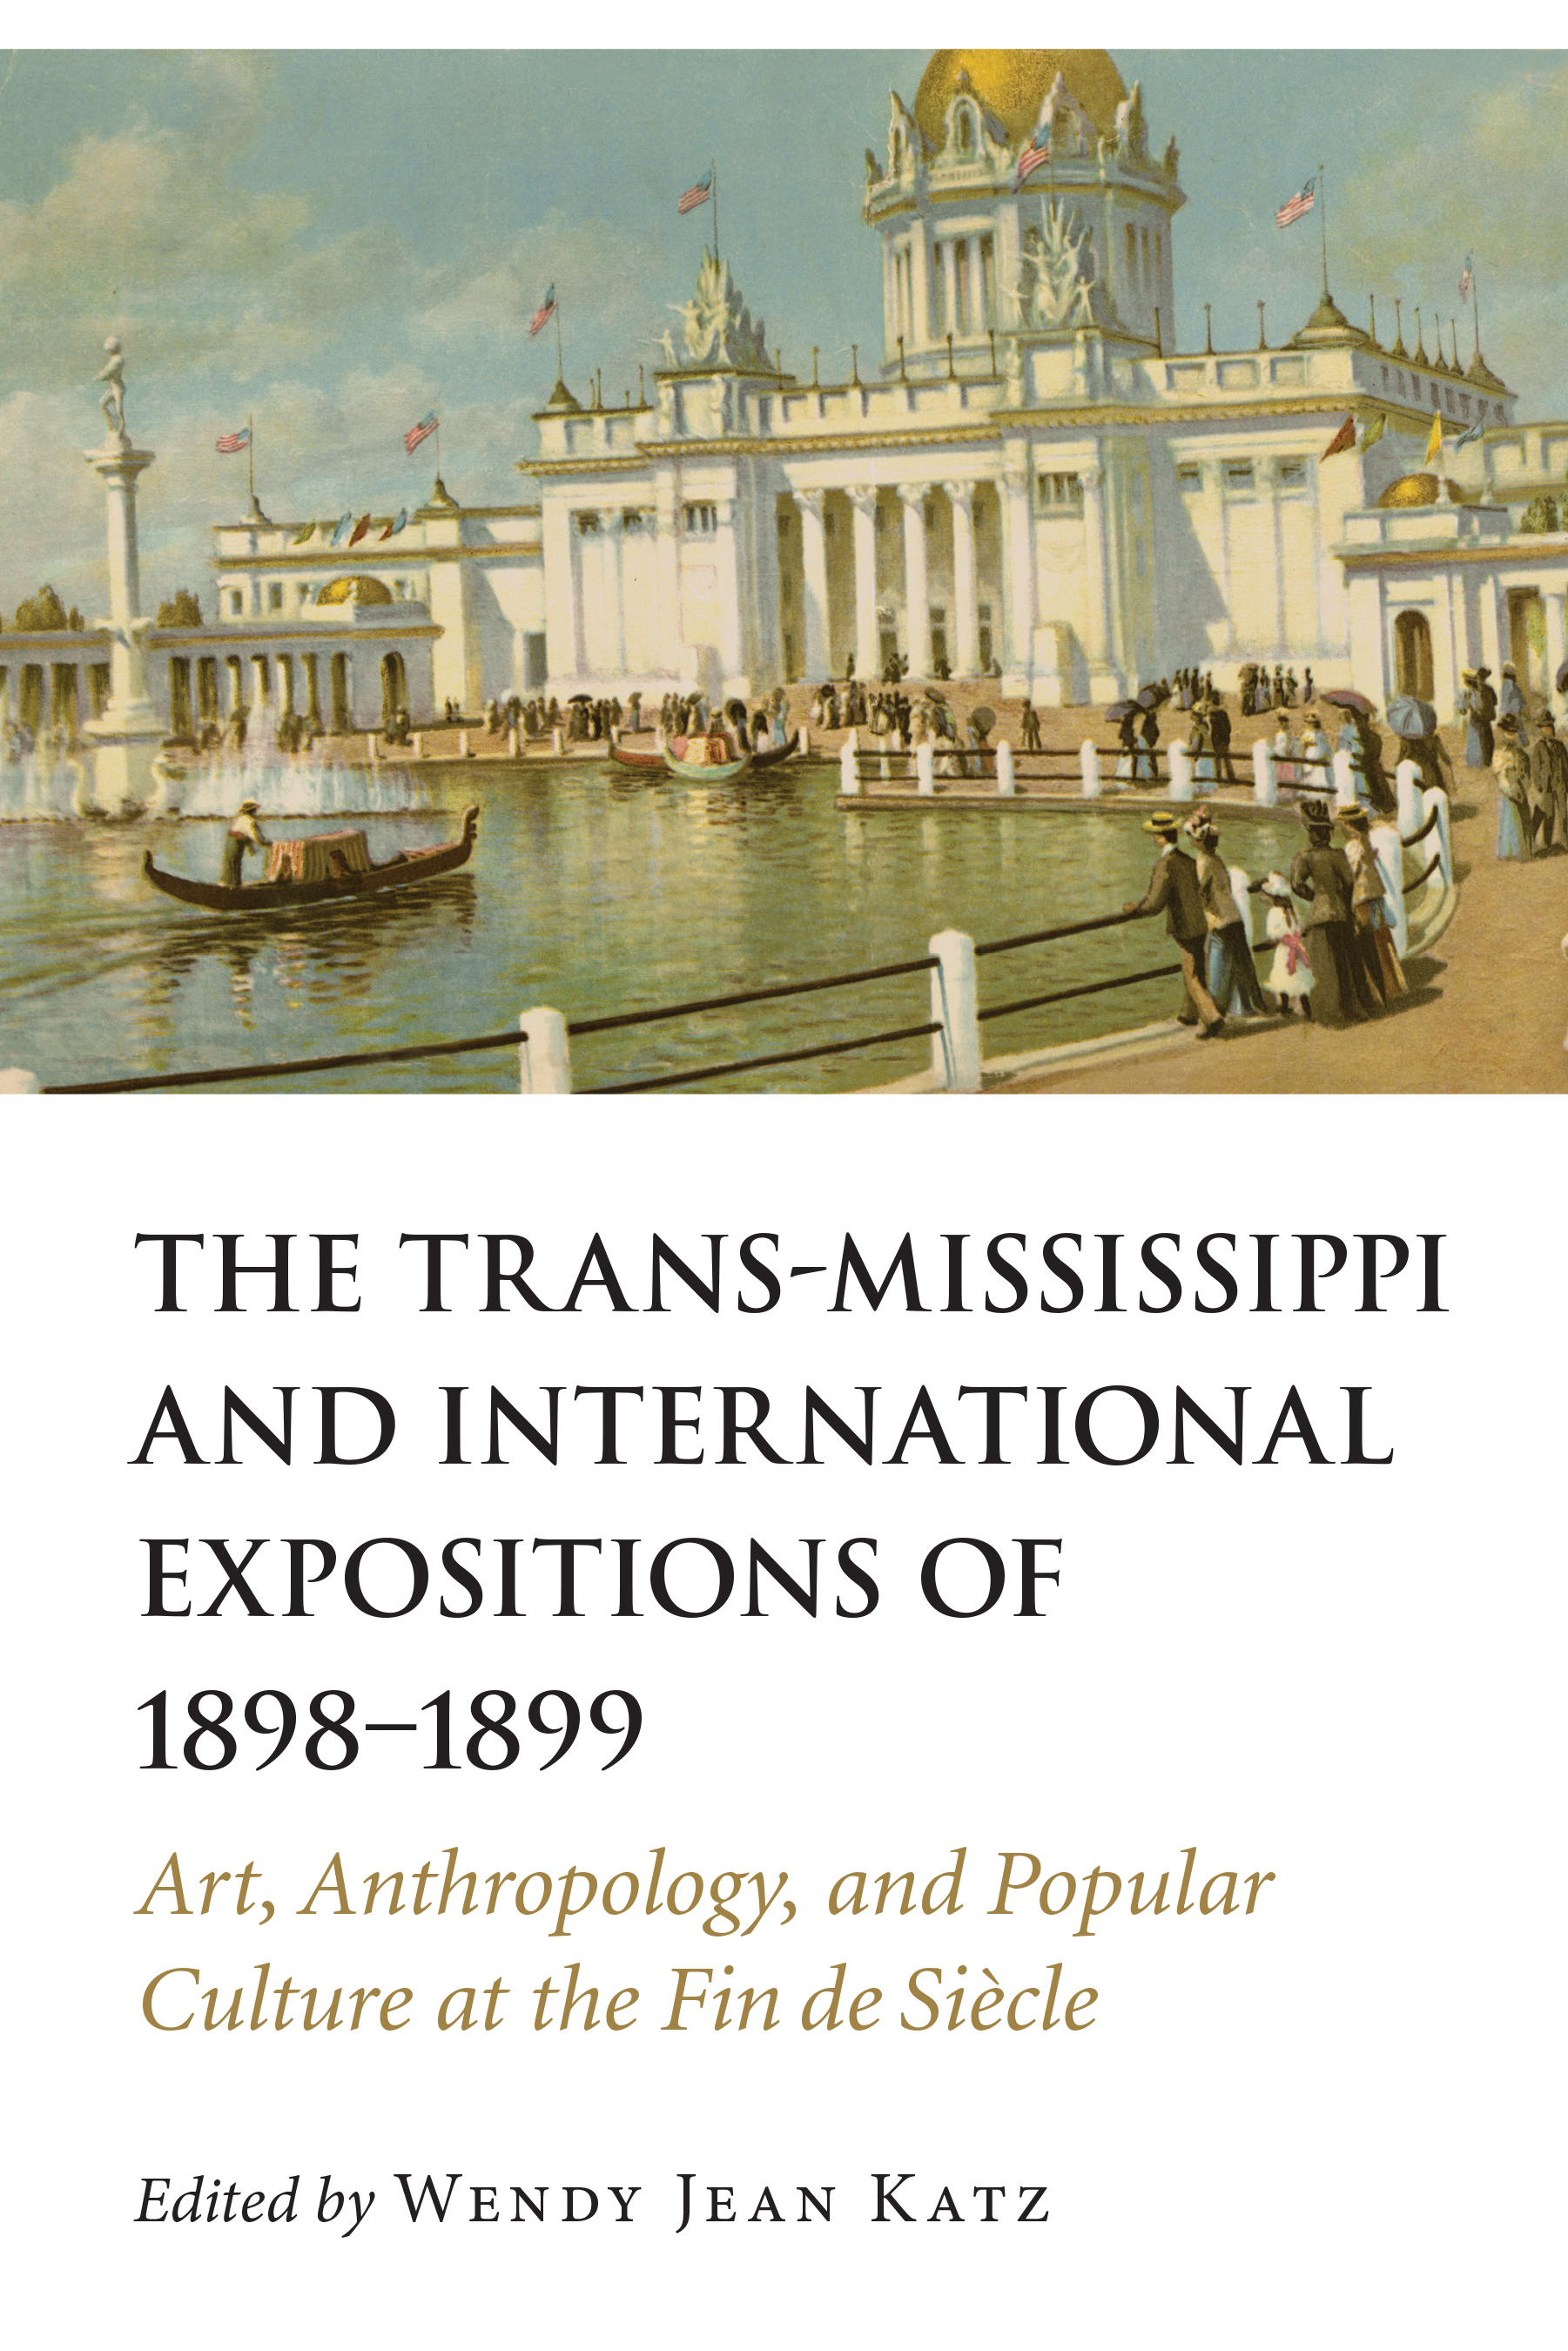 The Trans-Mississippi and International Expositions of 1898–1899: Art, Anthropology, and Popular Culture at the Fin de Siècle